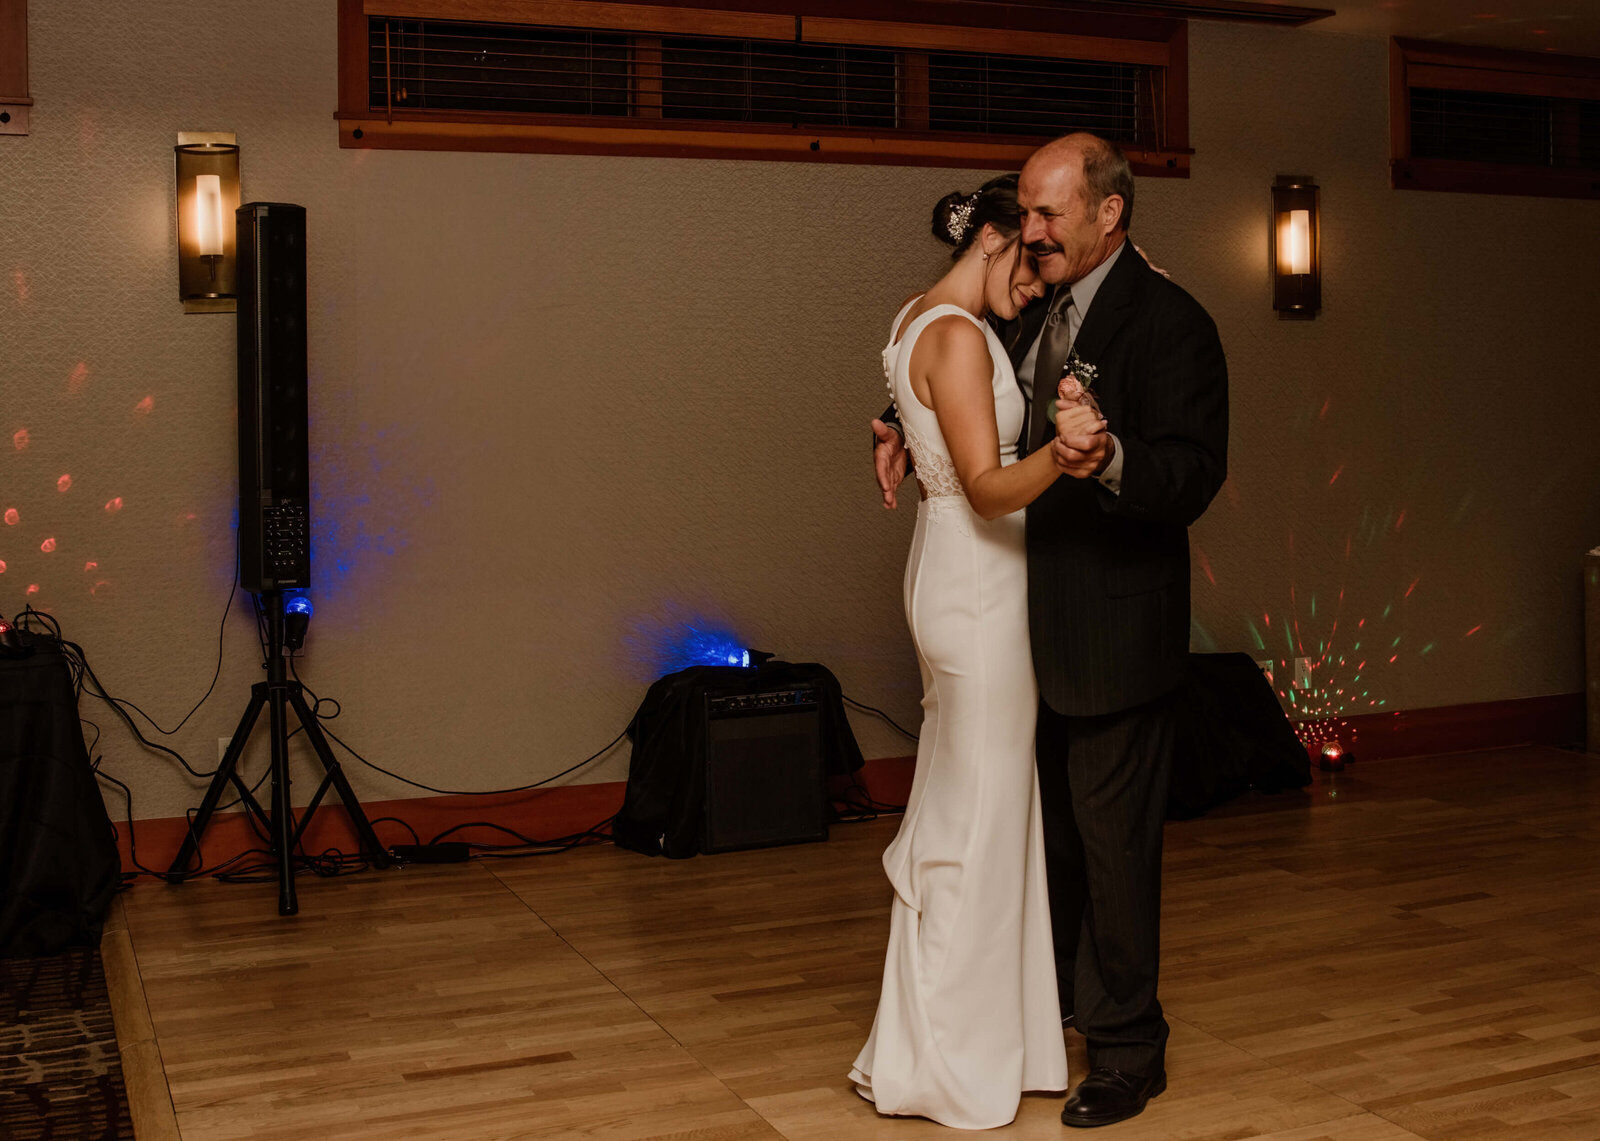 Father daughter dance at wedding reception.